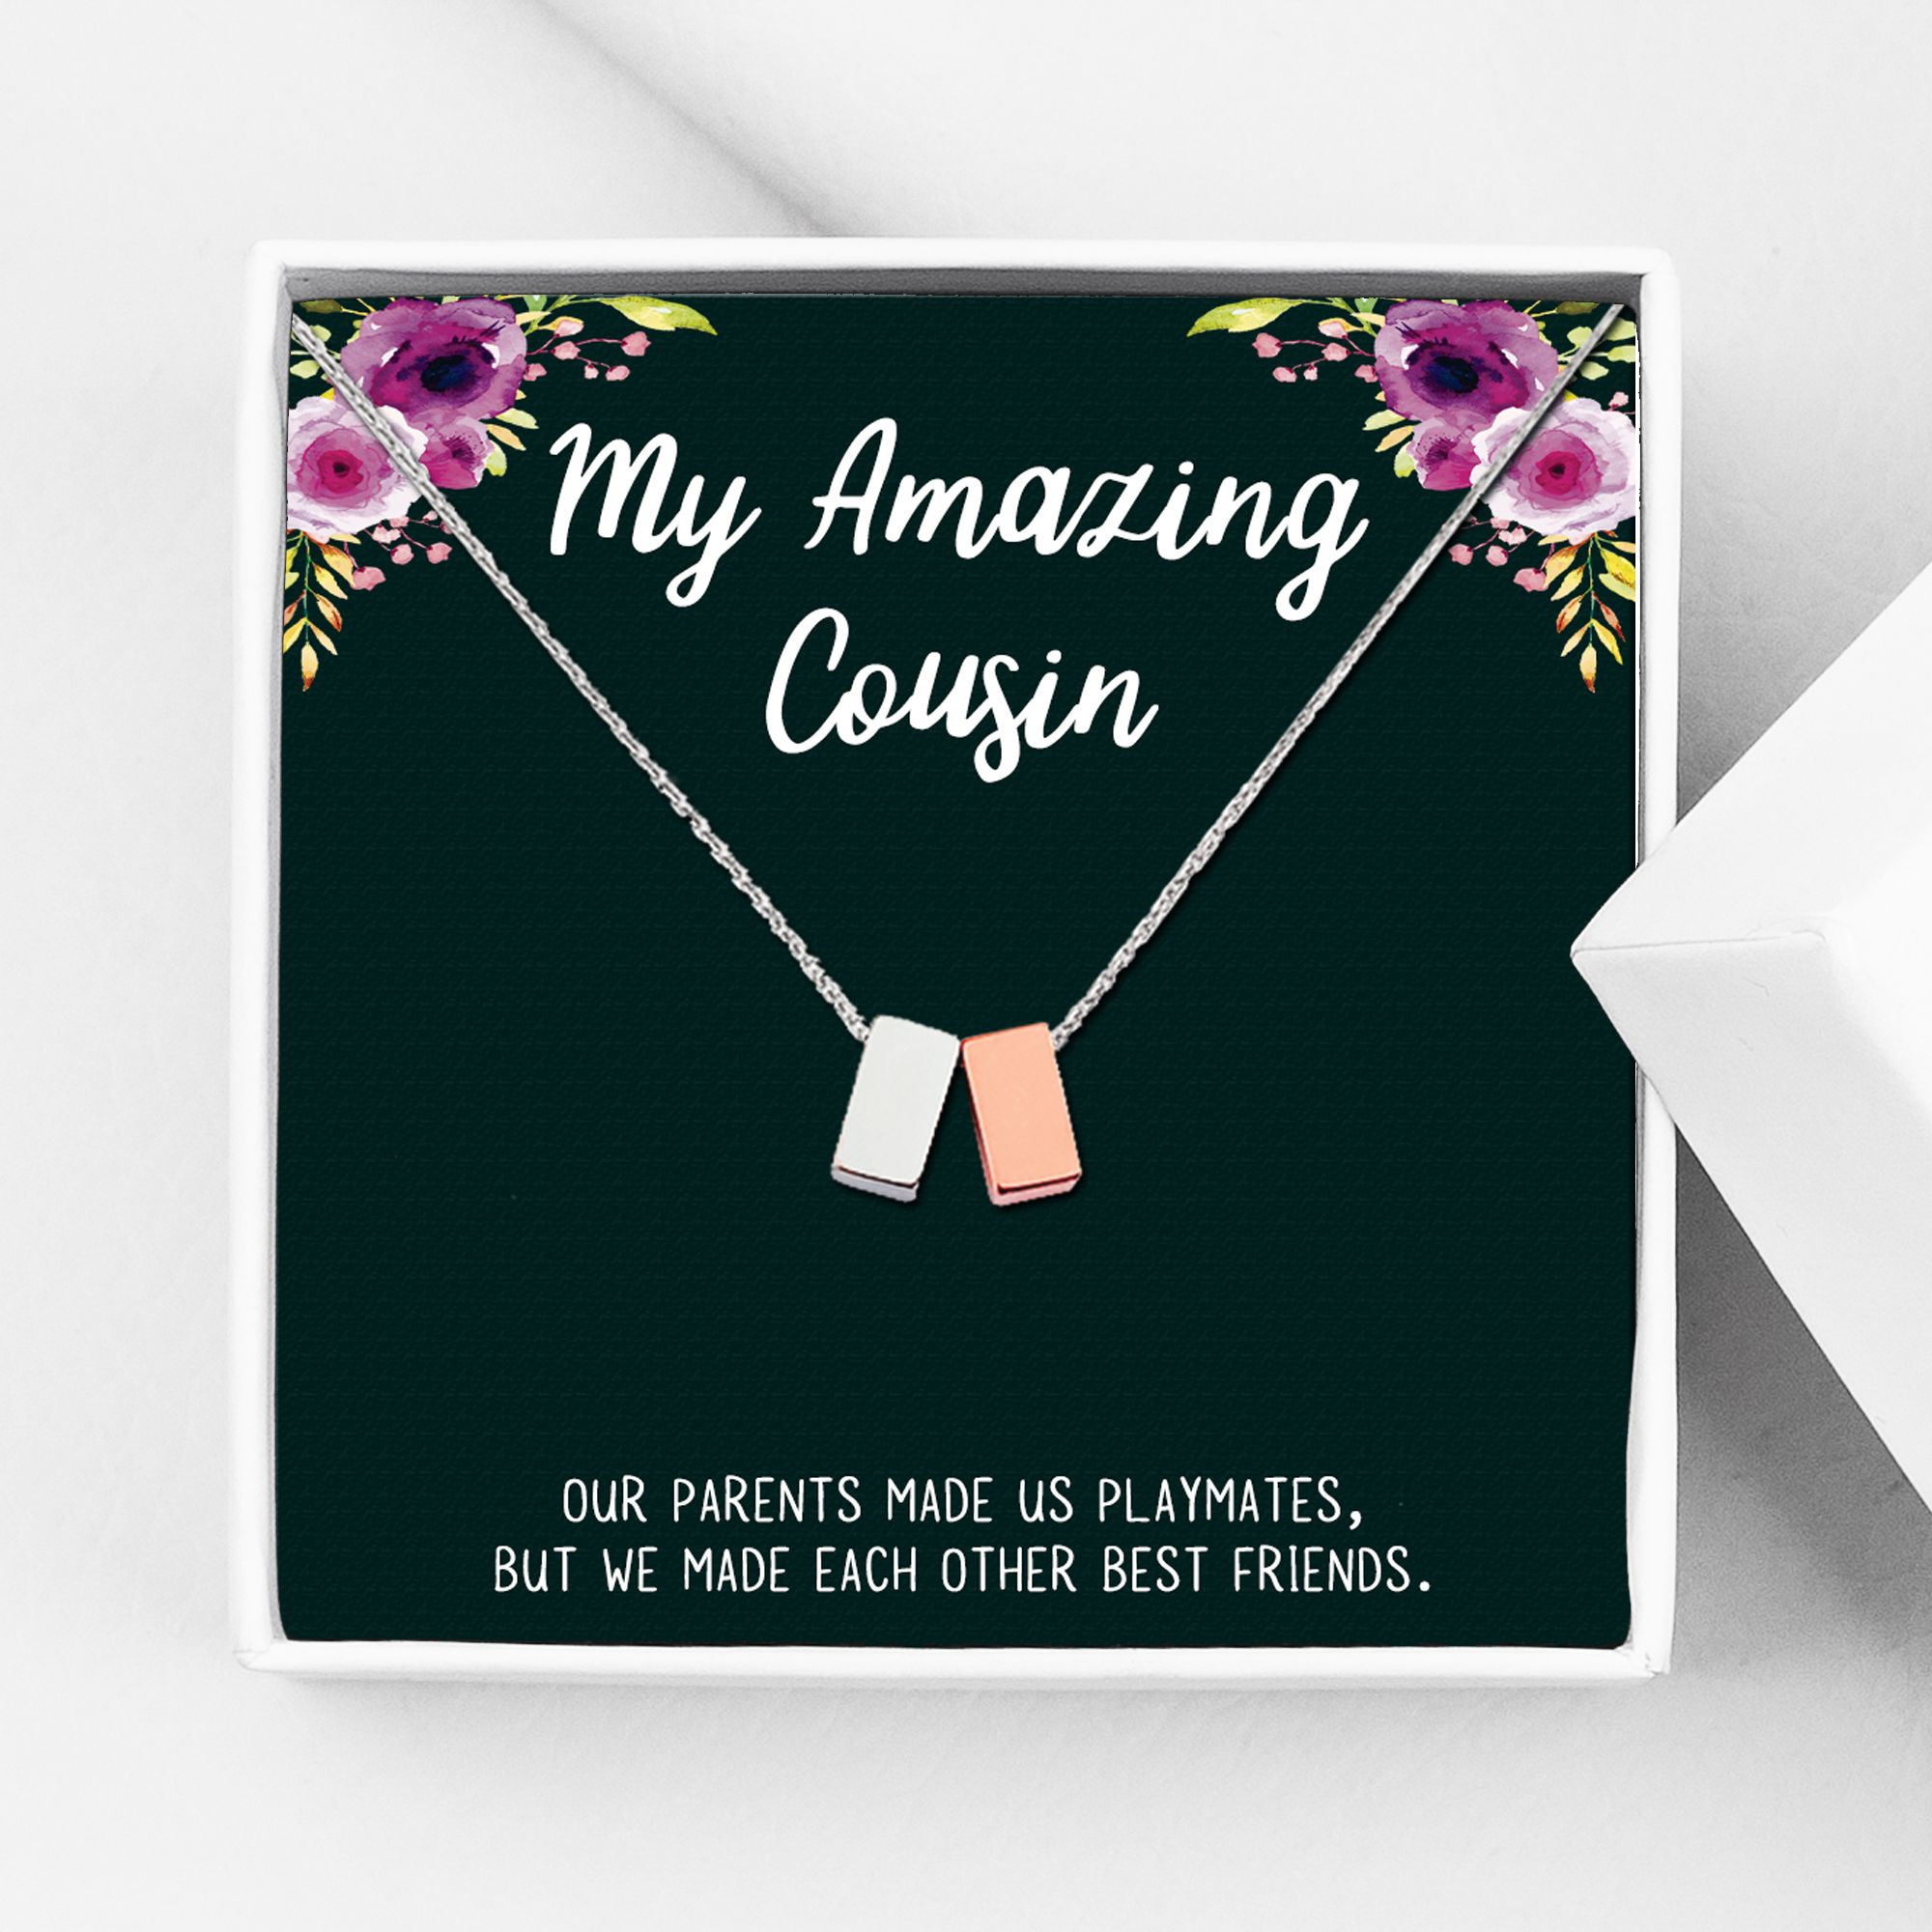 Anavia My Amazing Cousin Necklace, Necklace with Card, Cousin Gifts, Jewelry Gift, Gift for Family, Gift for Cousin, Cousin Birthday Gift, Christmas Gift for Her [1 Silver & 1 Rose Gold] - image 1 of 2